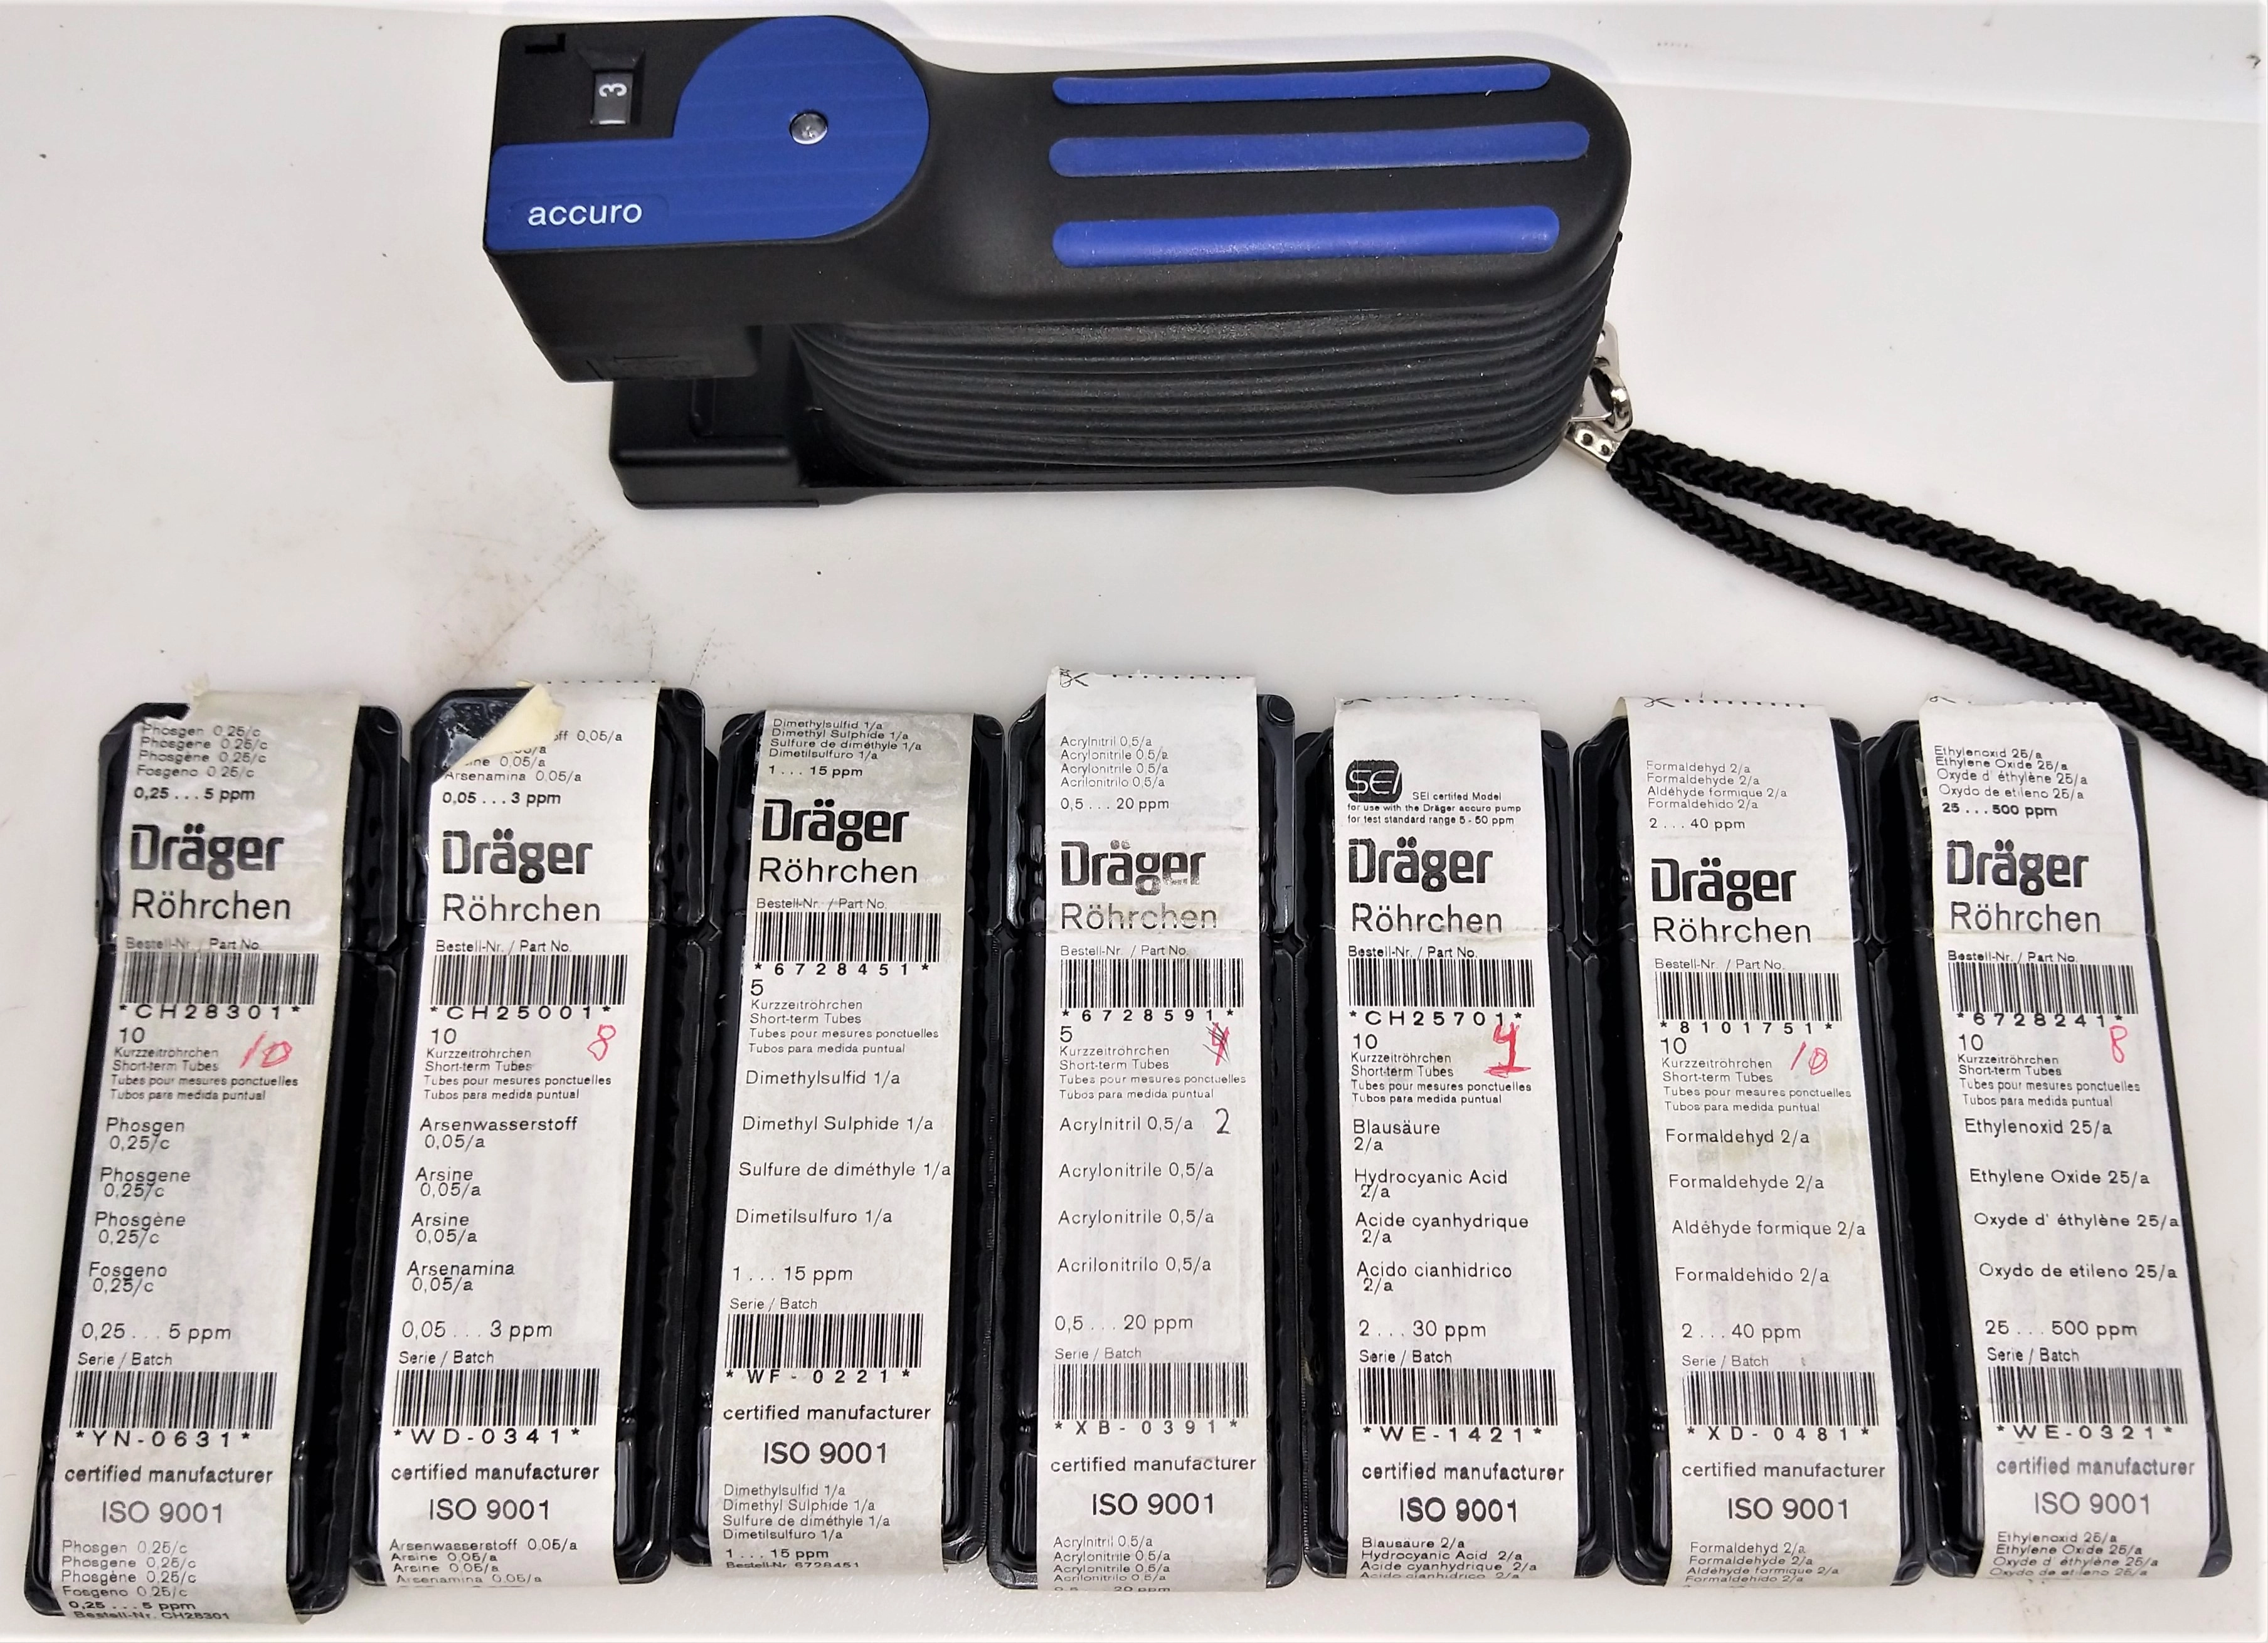 Drager Accuro Multi-Gas Detector Pump with Assorted Tubes